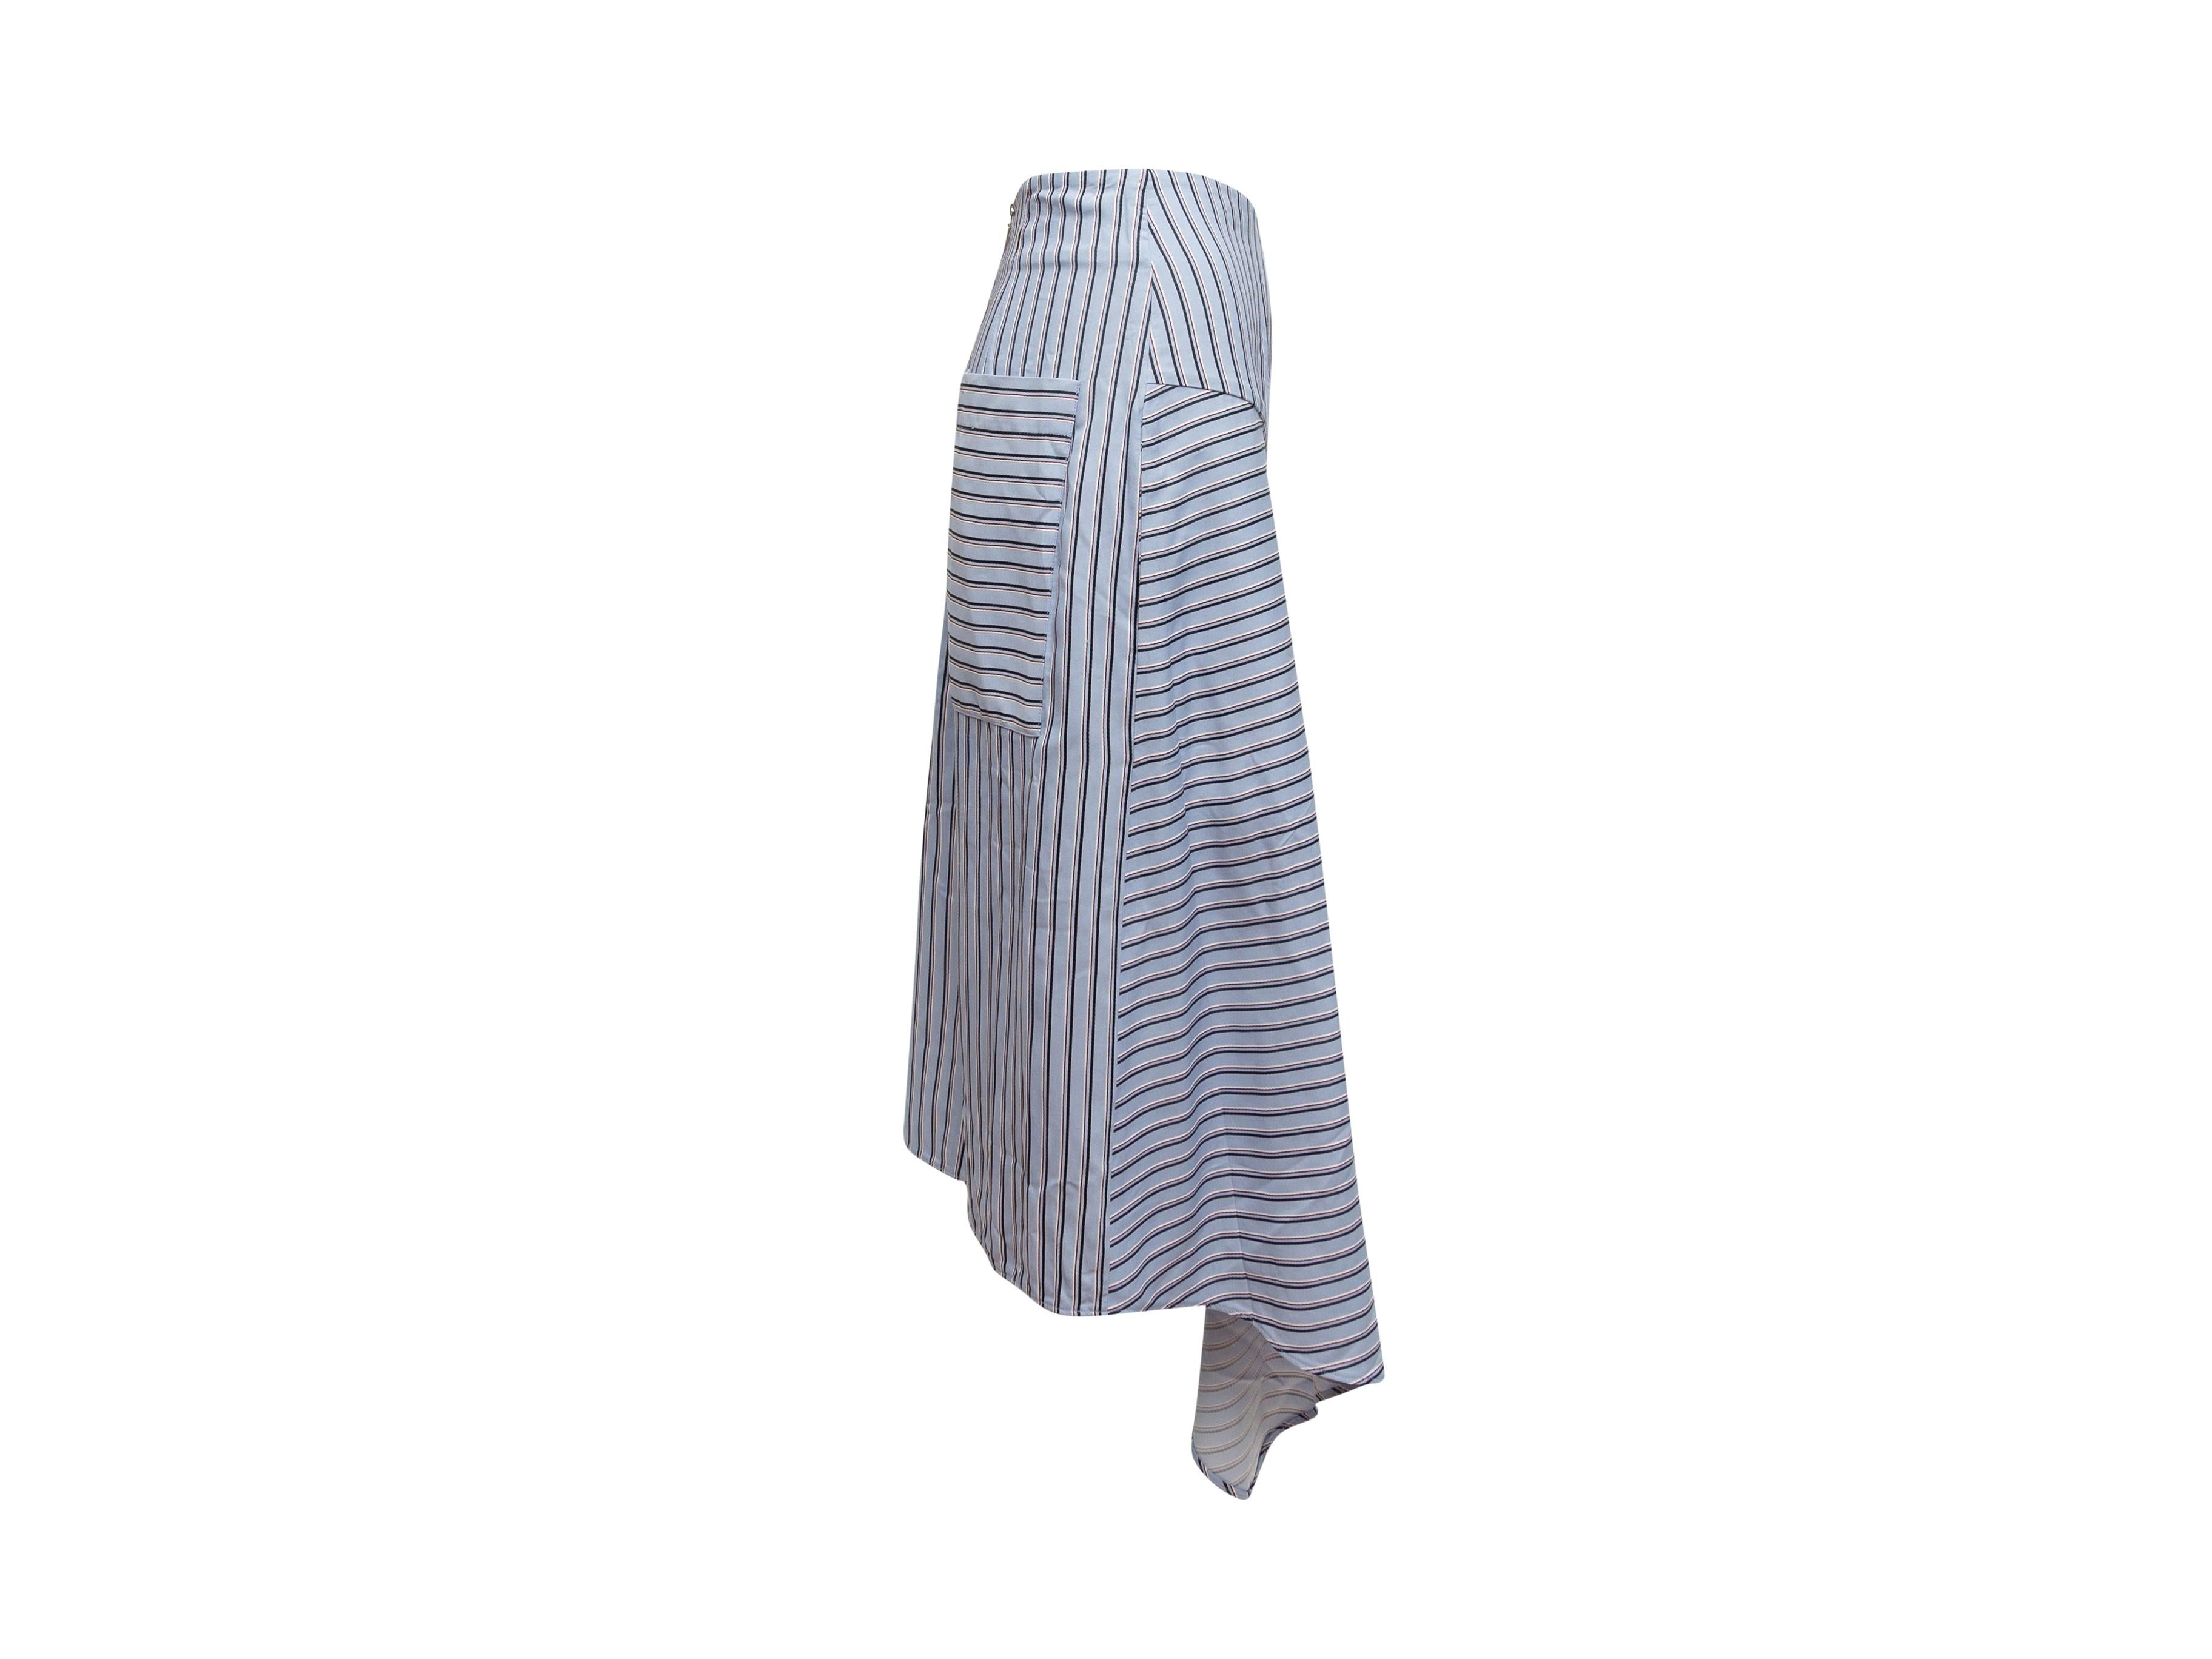 Product details: Light blue and multicolor striped midi skirt by Tibi. Asymmetrical hem. Dual patch pockets at back. Buckle accent at hip. Zip closure at center back. 32.5